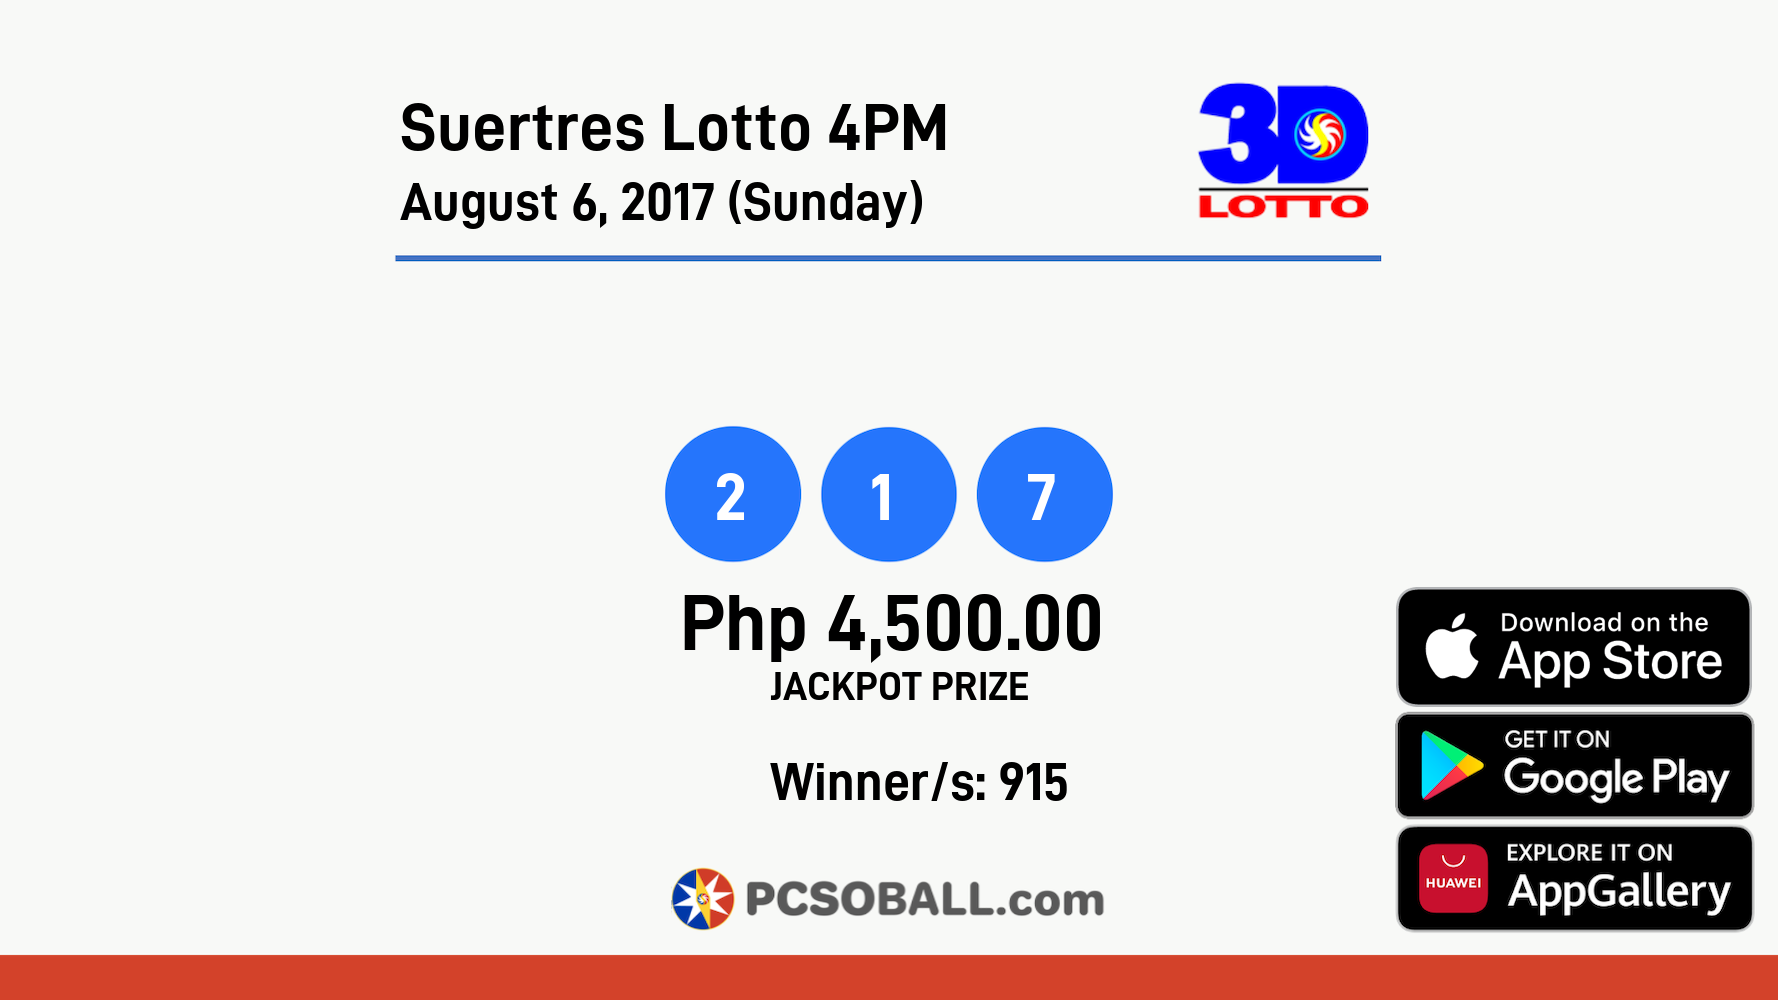 Suertres Lotto 4PM August 6, 2017 (Sunday) Result